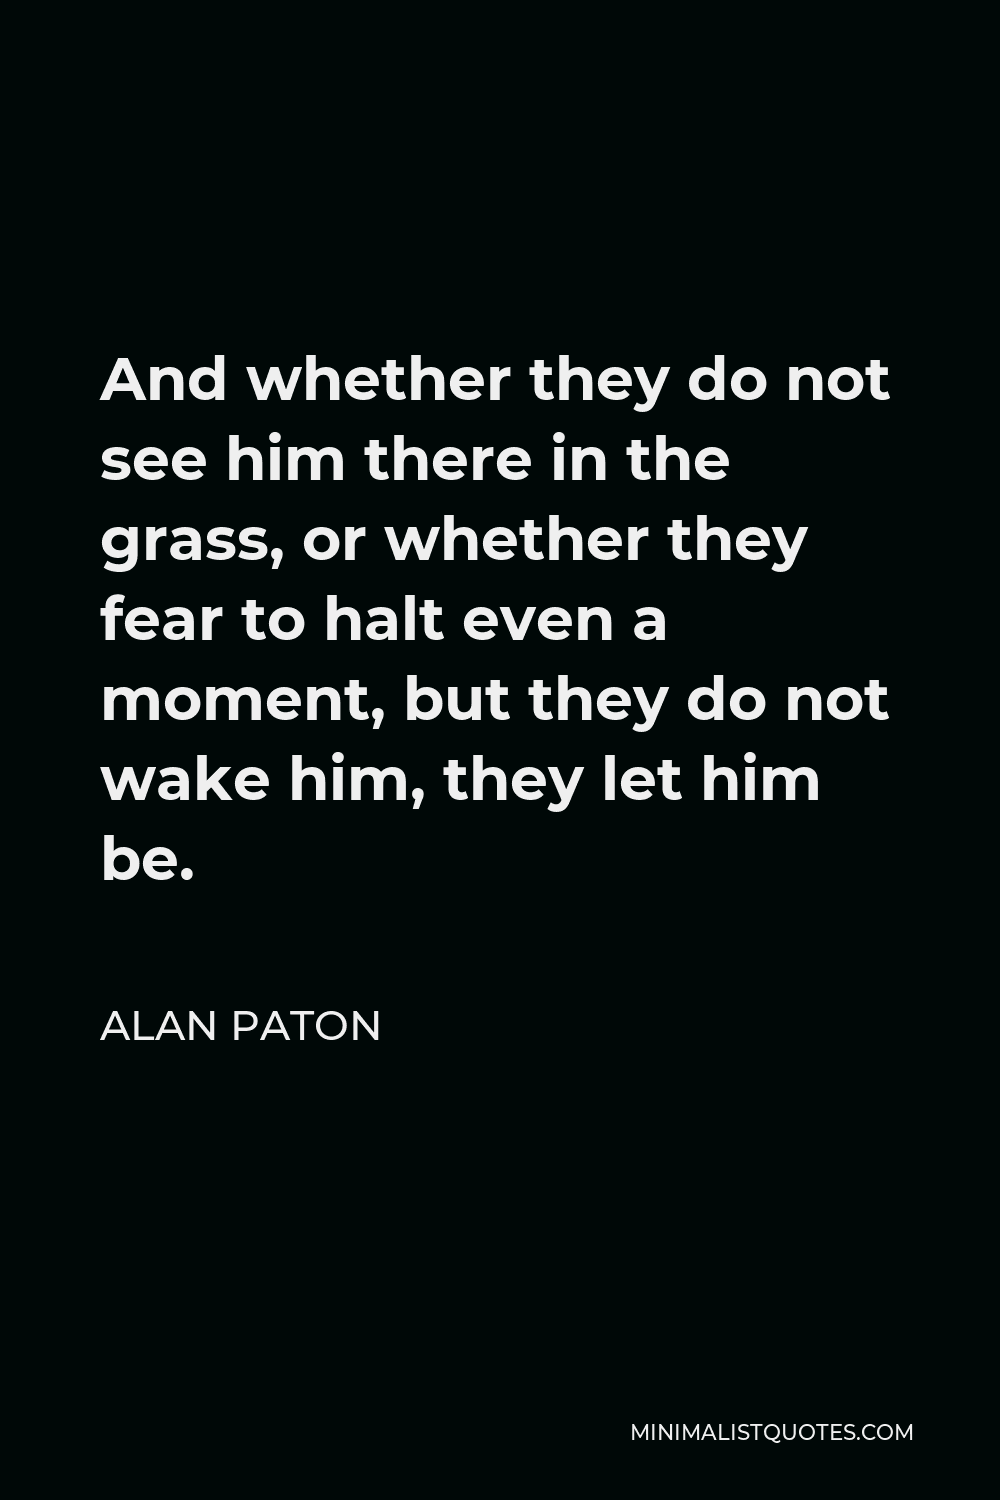 Alan Paton Quote - And whether they do not see him there in the grass, or whether they fear to halt even a moment, but they do not wake him, they let him be.